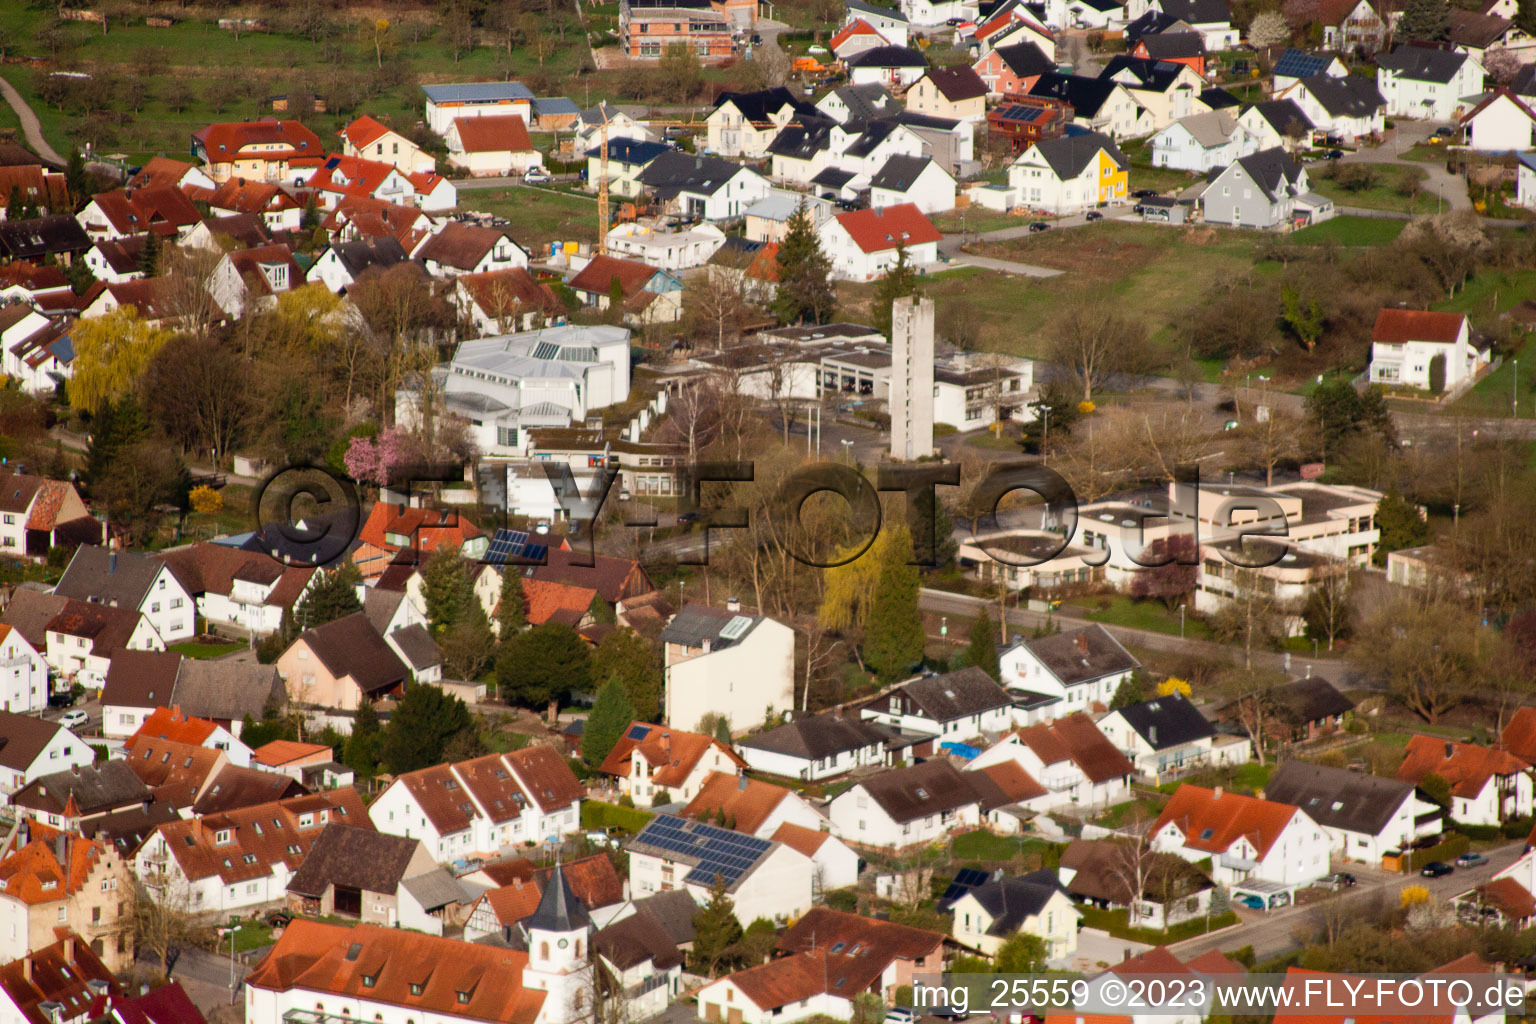 Elchesheim in the state Baden-Wuerttemberg, Germany from the drone perspective